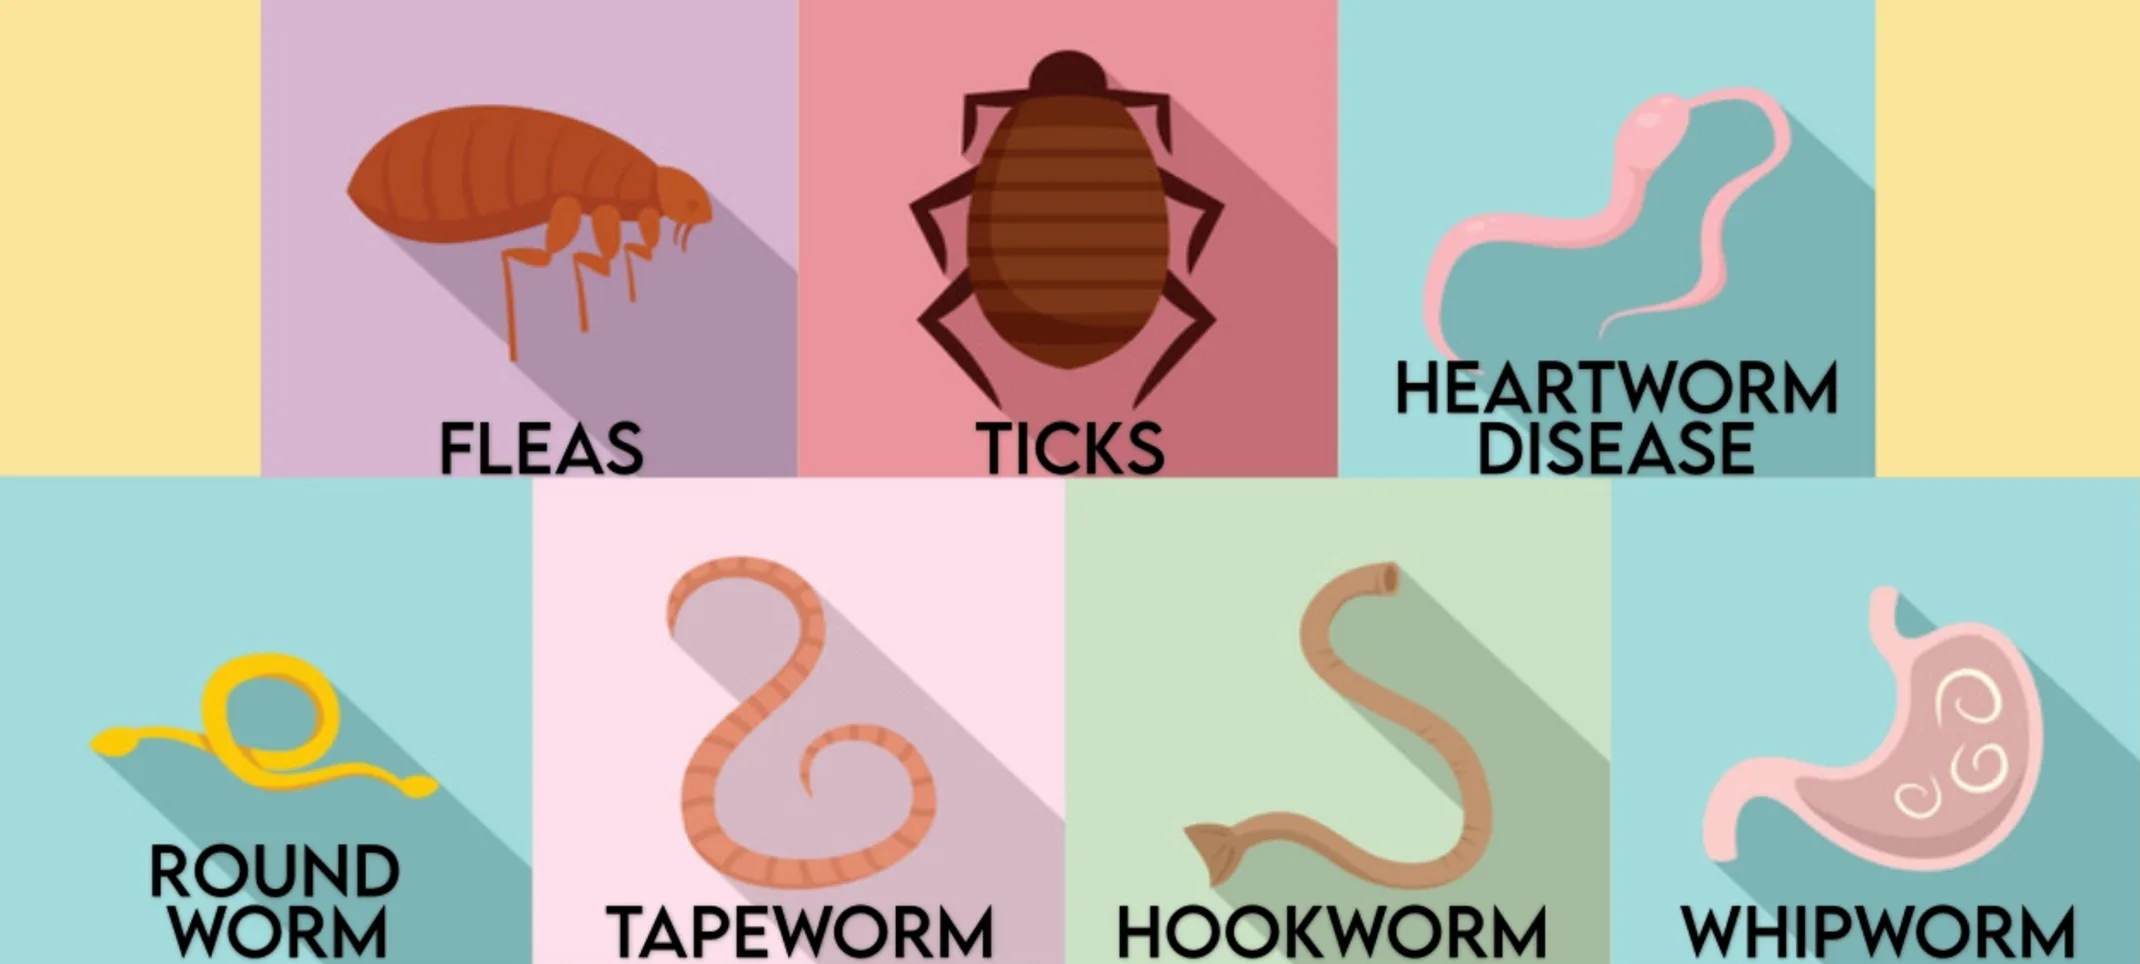 An illustration depicting fleas, ticks, heartworms, roundworms, tapeworms, hookworms, and whipworms.